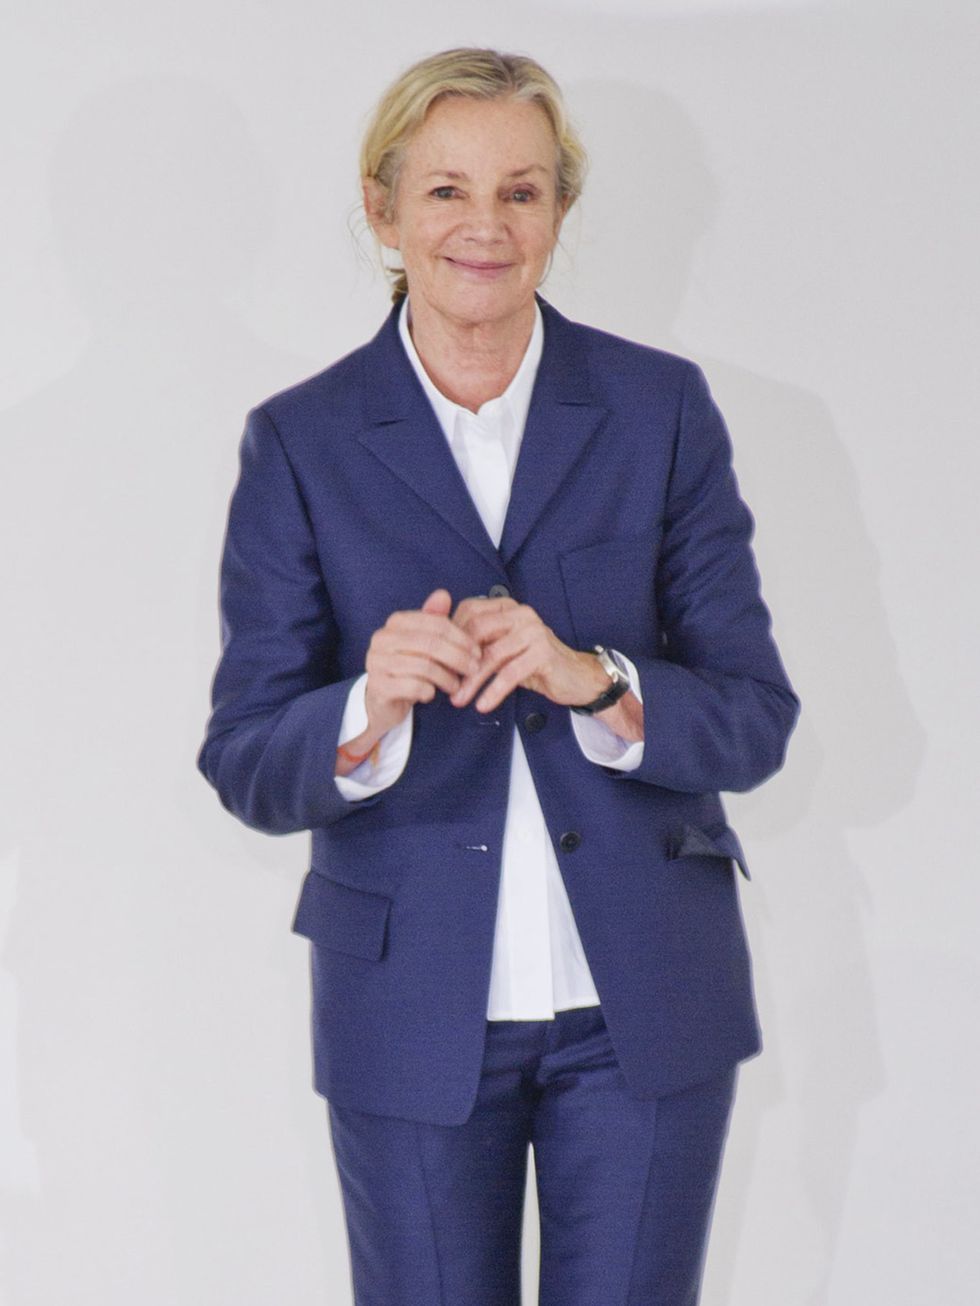 <p>Jil Sander taking her bow at the end of the catwalk show during Milan Fashion Week</p>